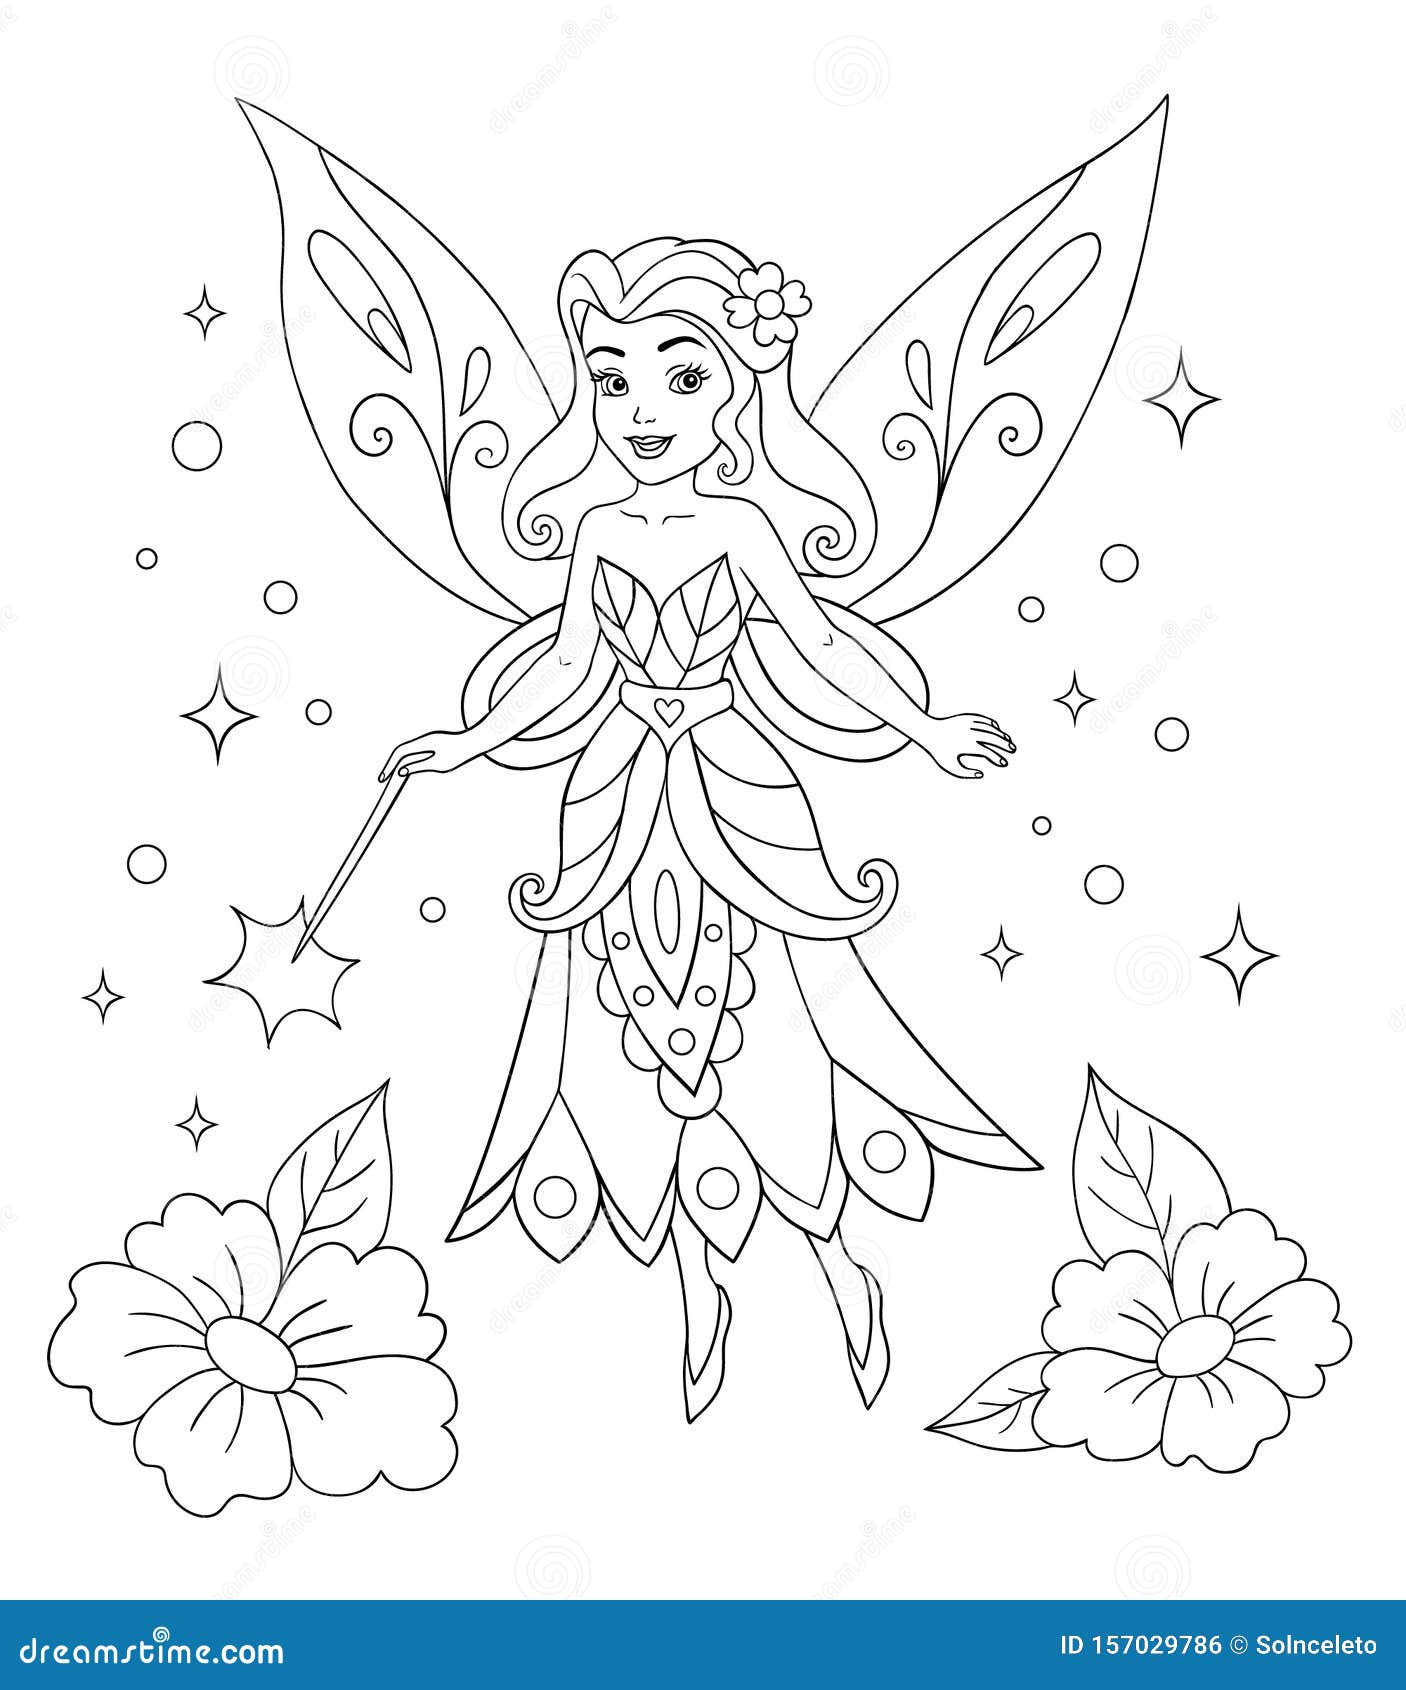 fashionable princes coloring book  on white background.